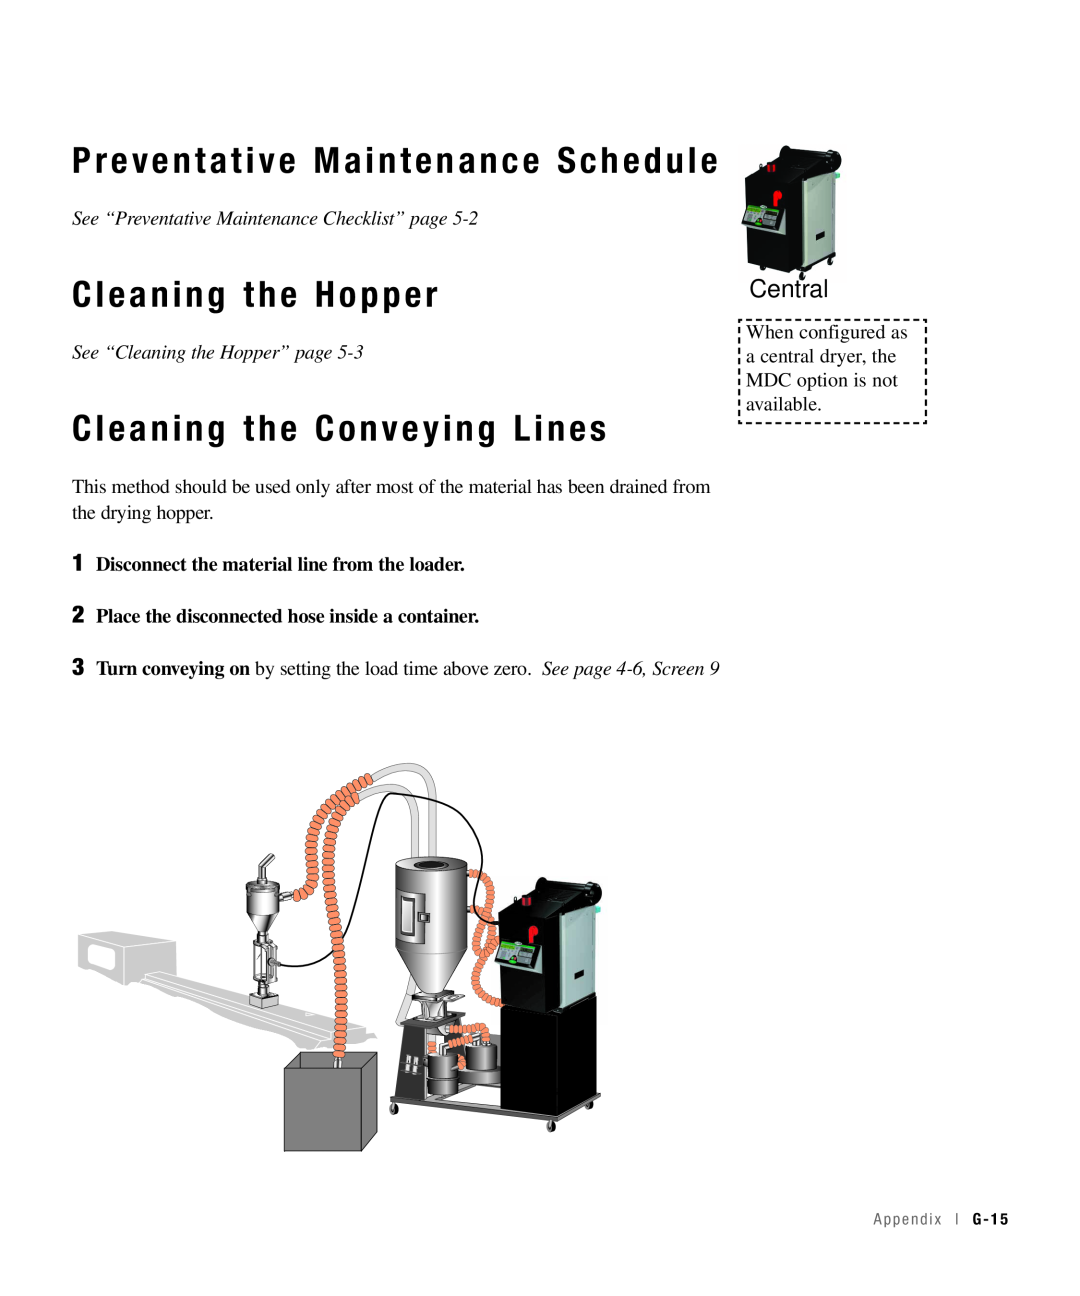 Conair 15, 25, 50, 100 Preventative Maintenance Schedule, Cleaning the Conveying Lines, Cleaning the Hopper, Central 